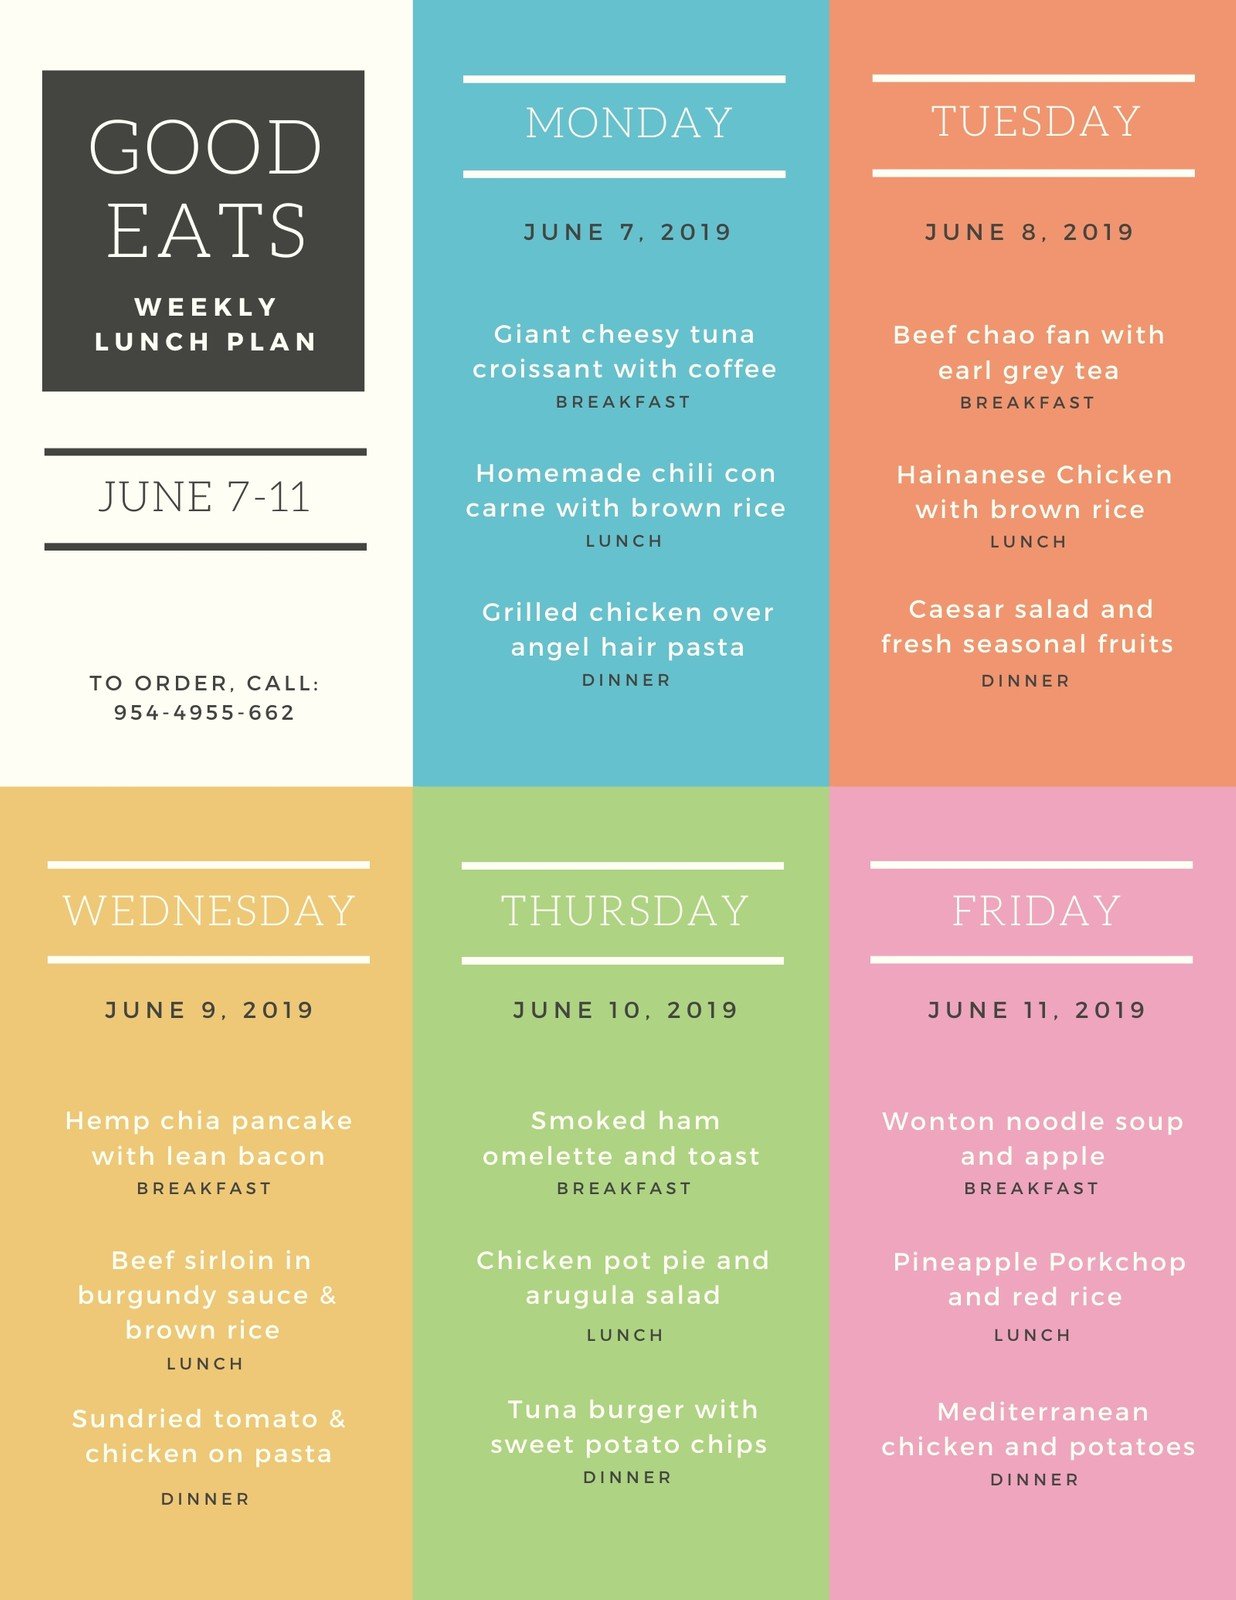 https://marketplace.canva.com/EADajs9H50k/1/0/1236w/canva-colorful-boxes-weekly-meal-planner-menu-7C5_f1HkC5Q.jpg